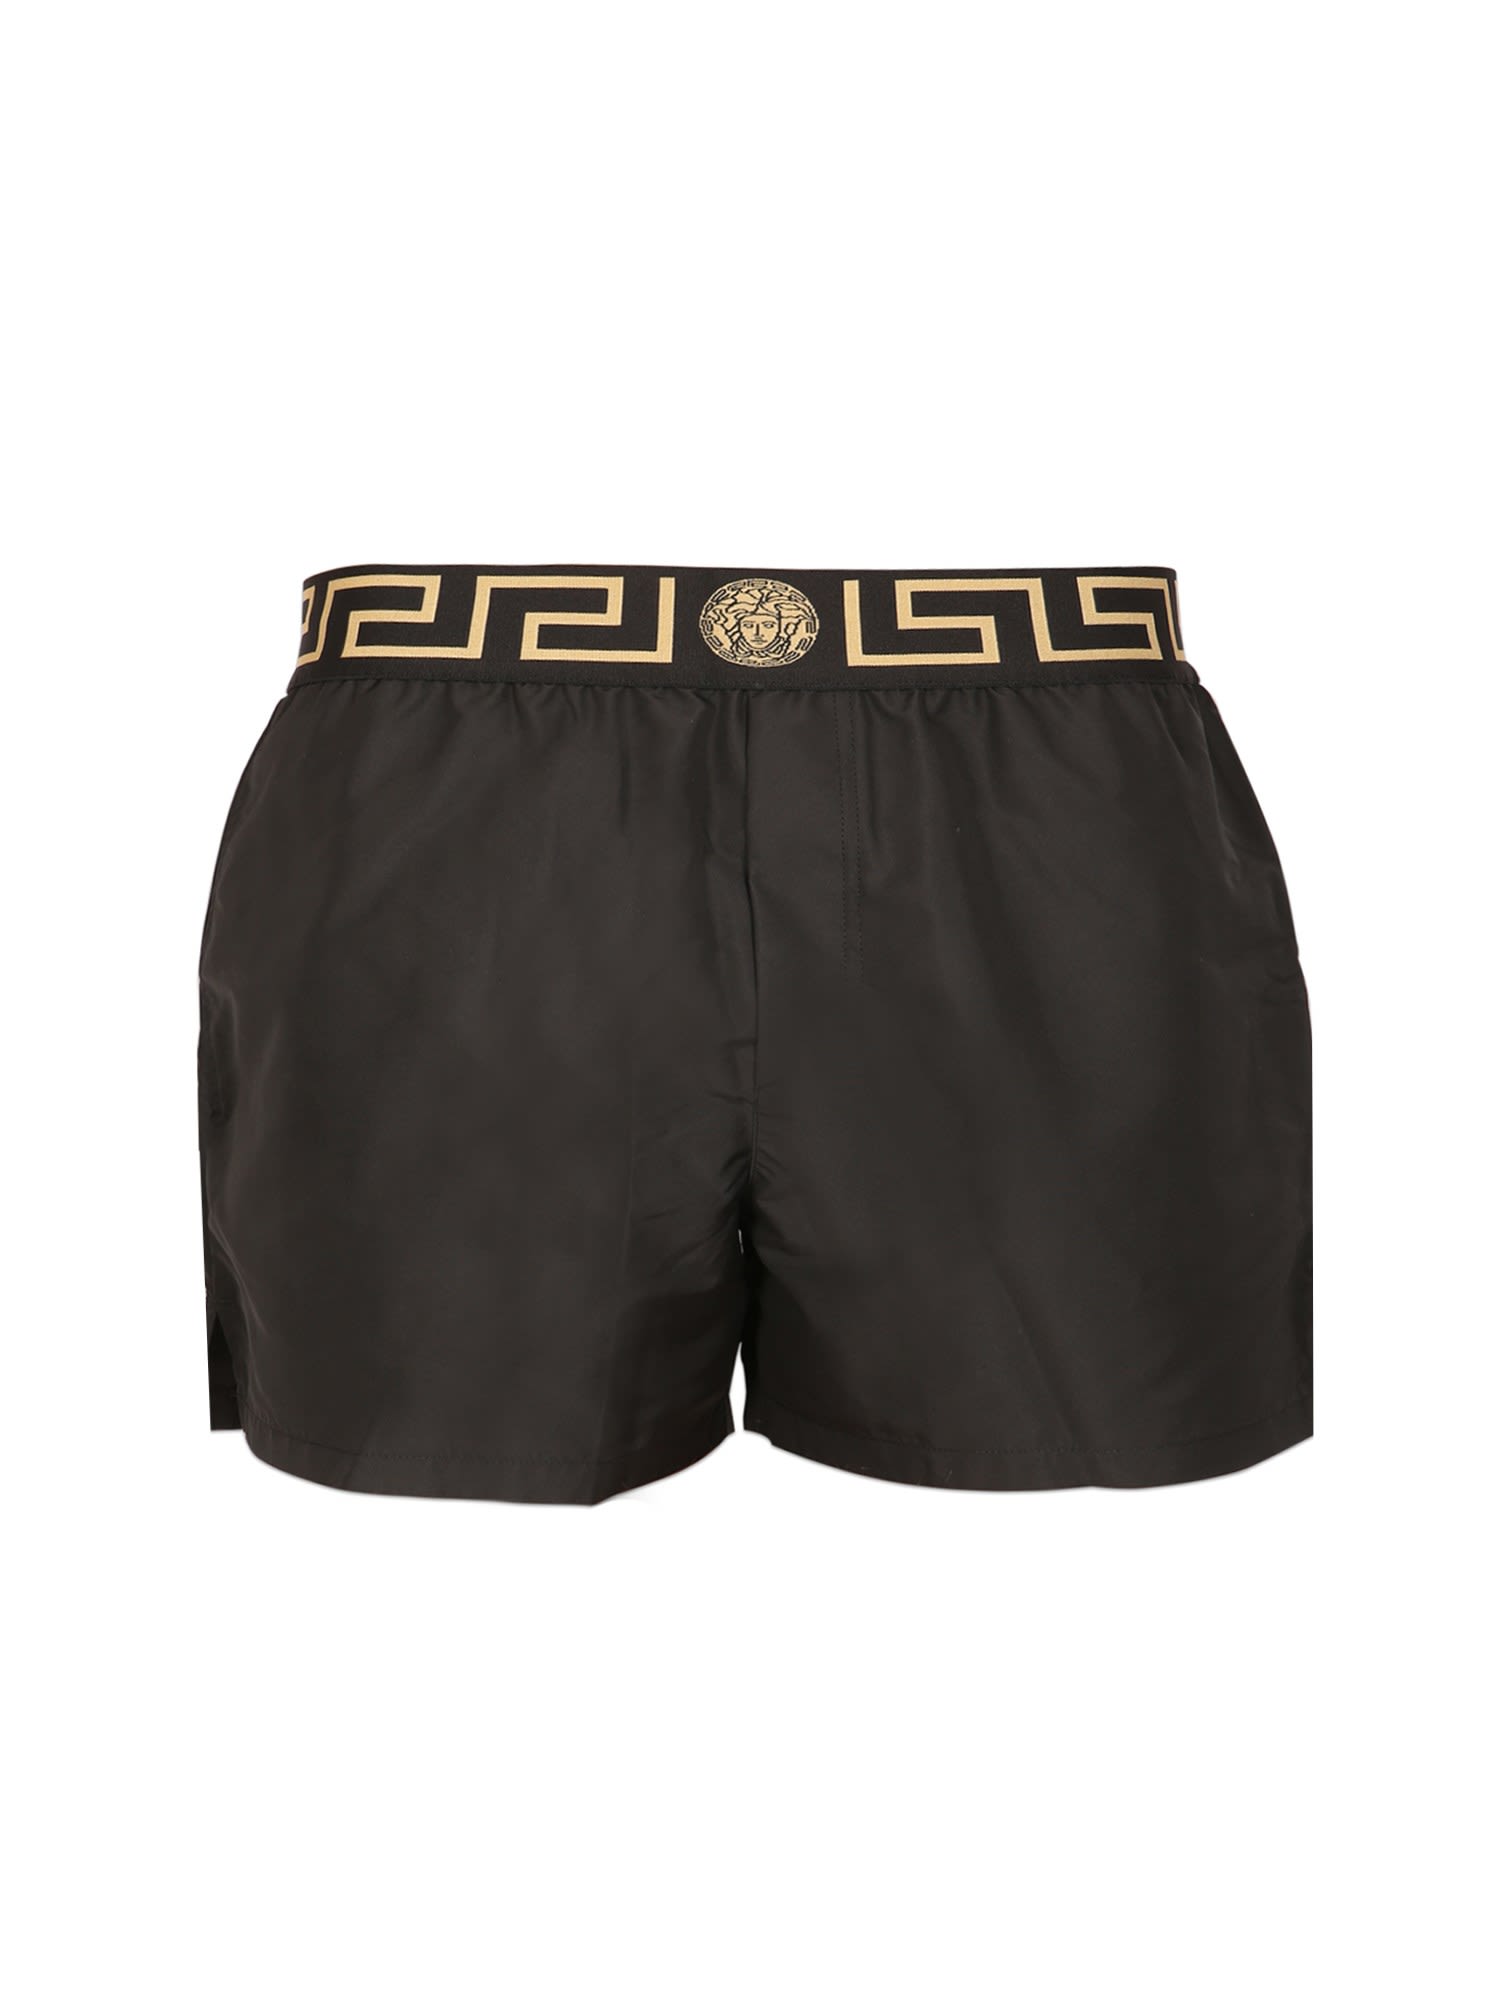 Versace Short Swimsuit With Greek